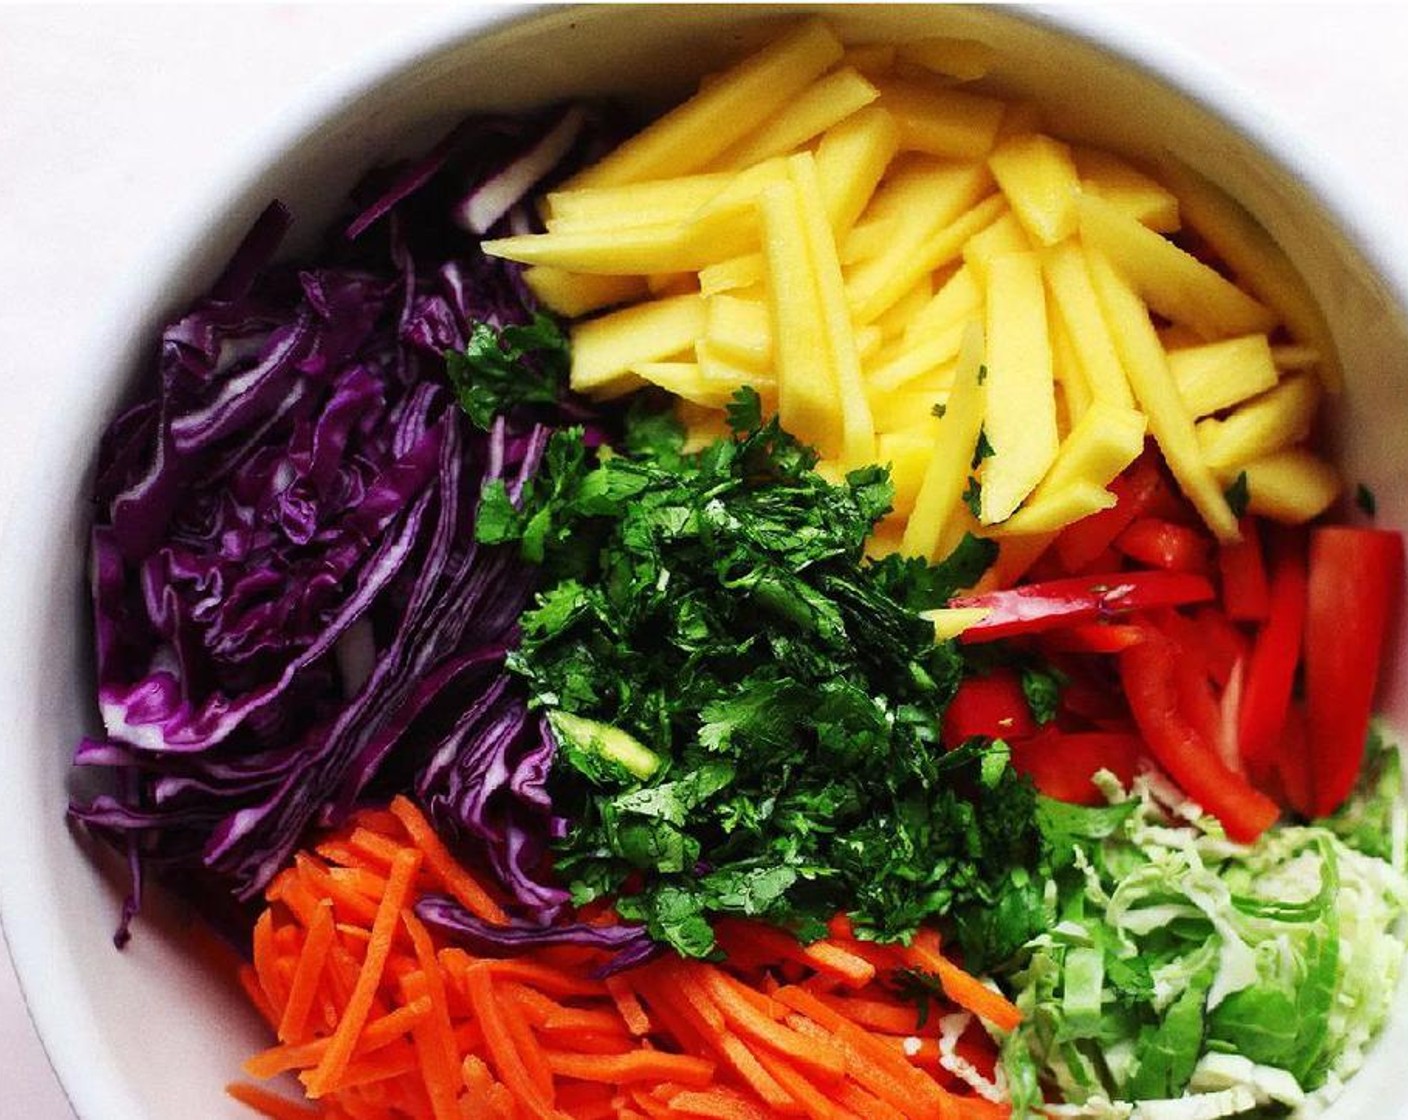 step 1 Add Red Cabbage (3 cups), Carrots (2 cups), Brussels Sprouts (1 cup), Fresh Cilantro (1 cup), and Mango (1) in a medium or large bowl.